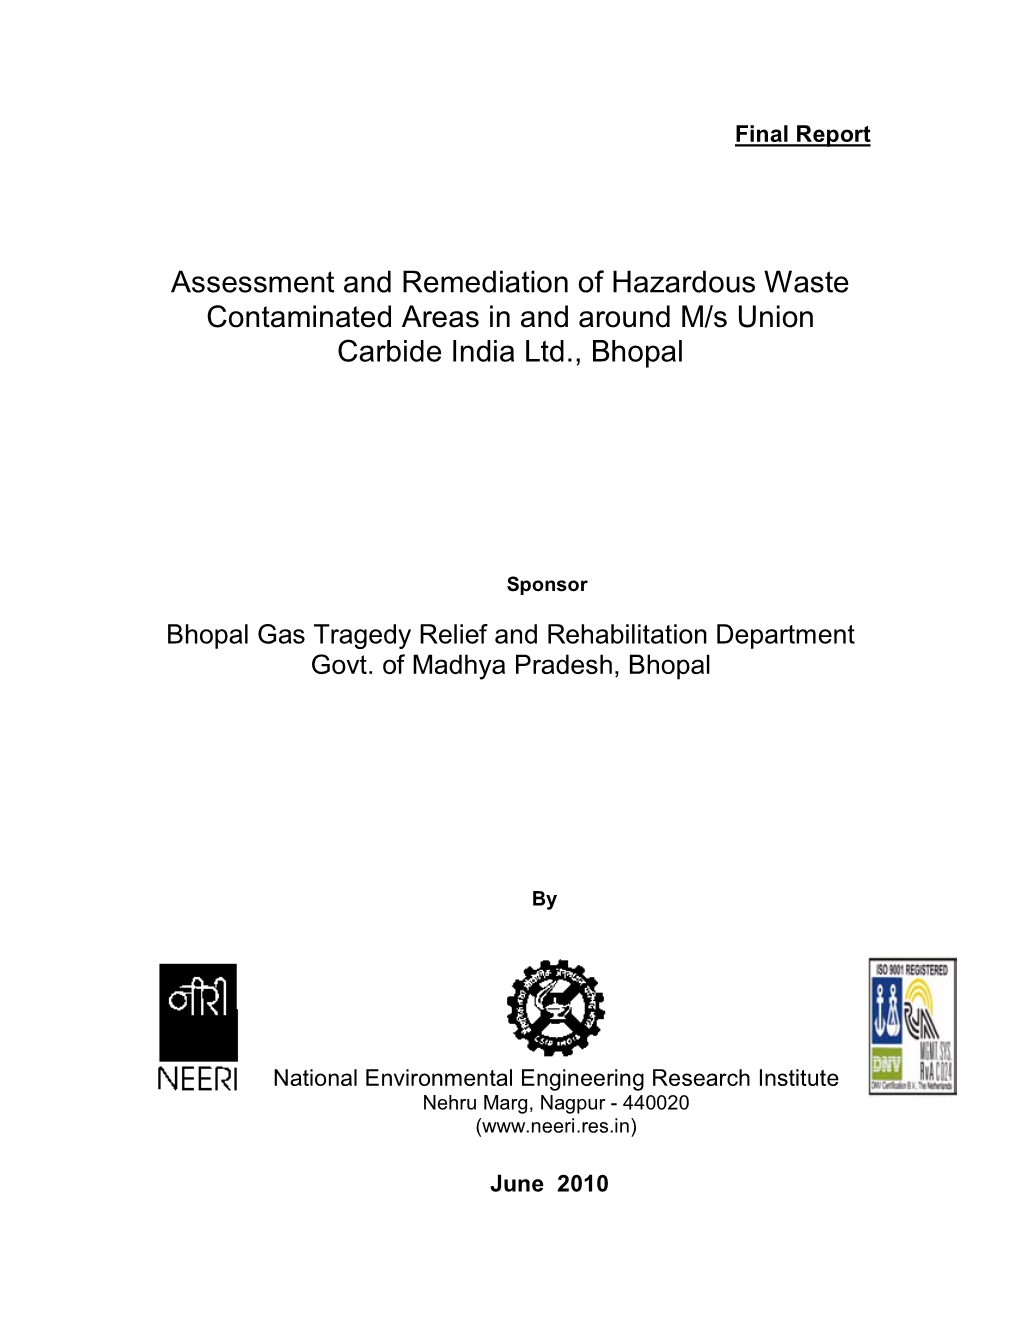 Assessment and Remediation of Hazardous Waste Contaminated Areas in and Around M/S Union Carbide India Ltd., Bhopal